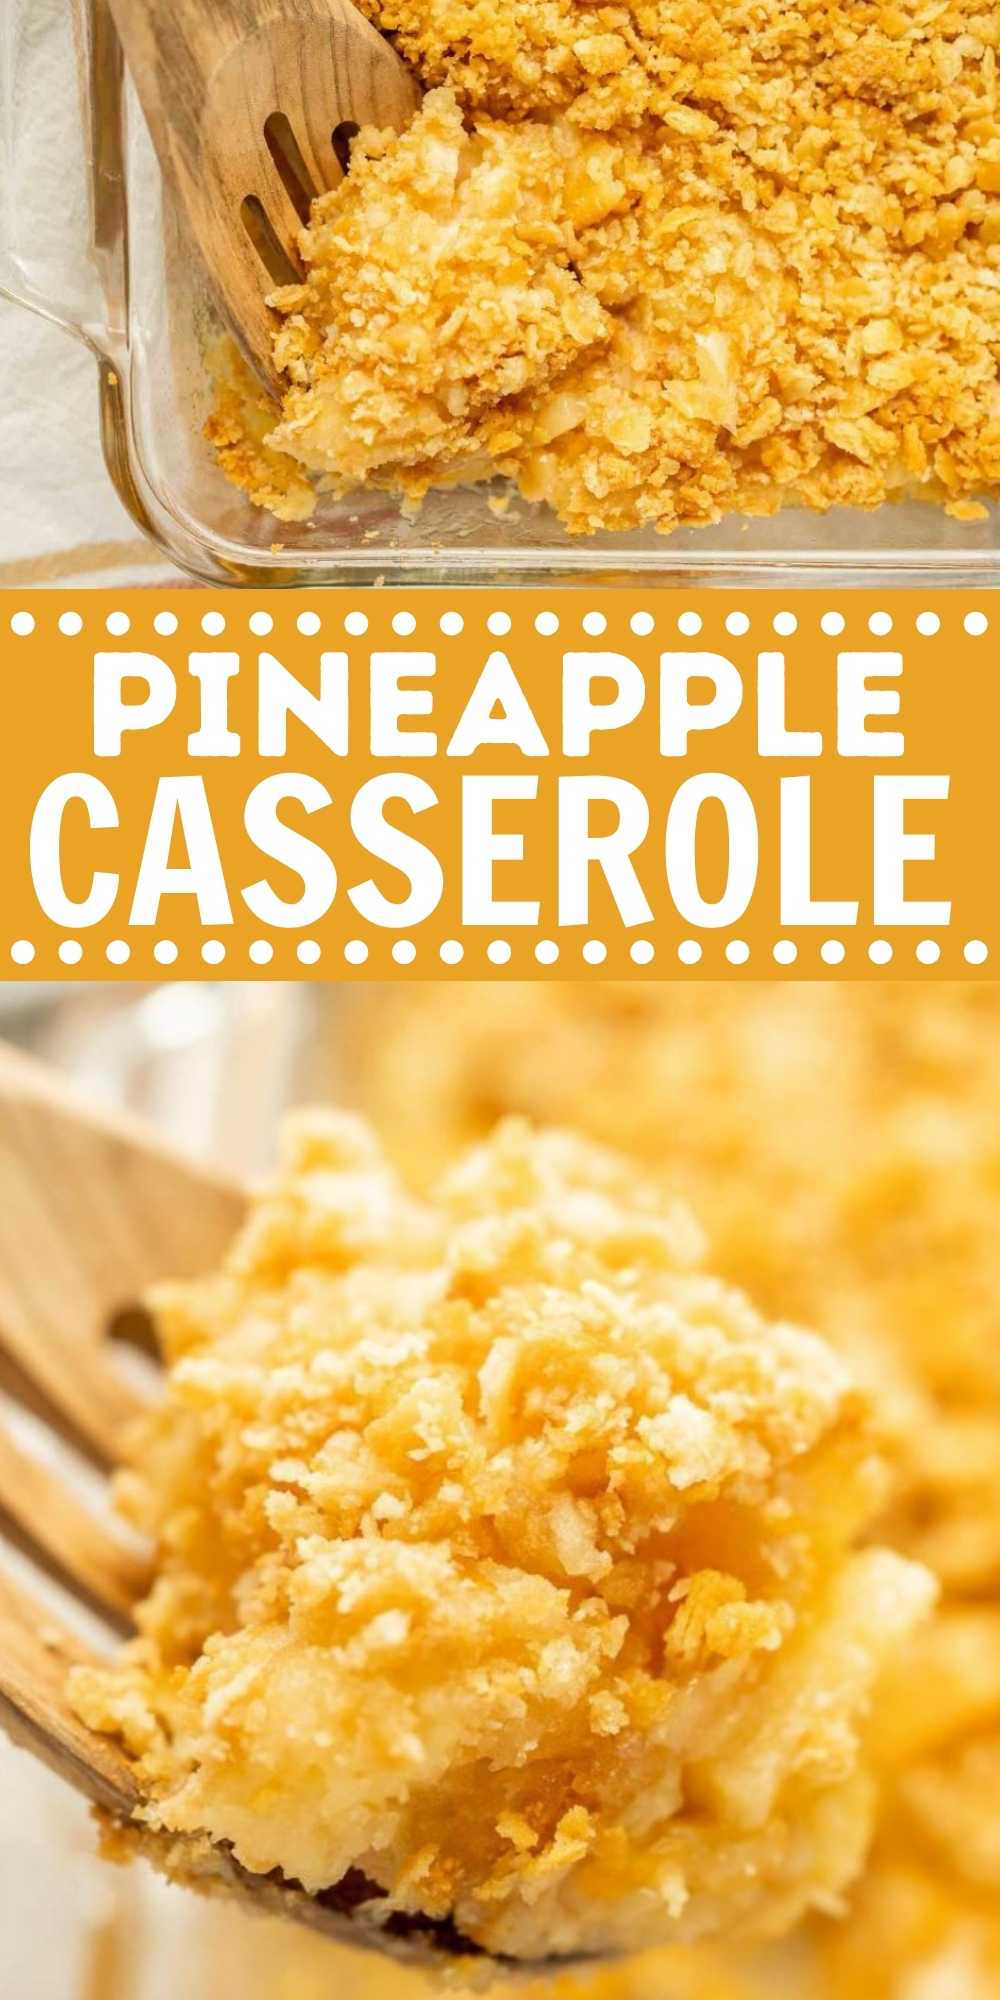 Pineapple Casserole is a popular southern dish. It is loaded with pineapple. cheese, and topped with bread crumbs or you can even use Ritz Crackers. . Easy to make casserole dish. #eatingonadime #pineapplecasserole #sidedish